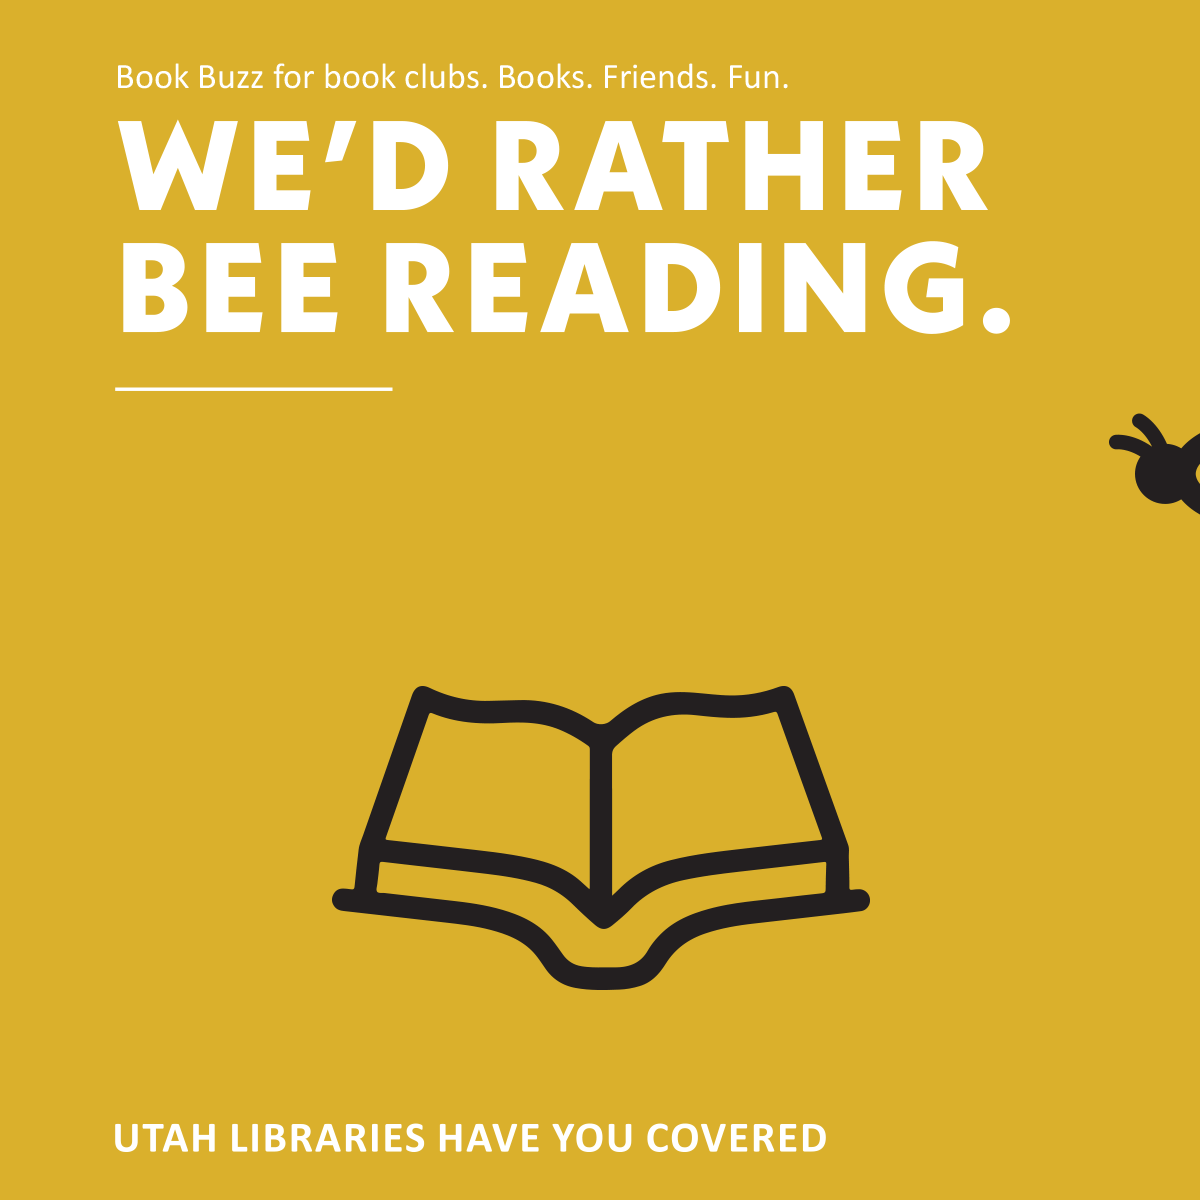 Book Buzz - Utah Libraries Have You Covered